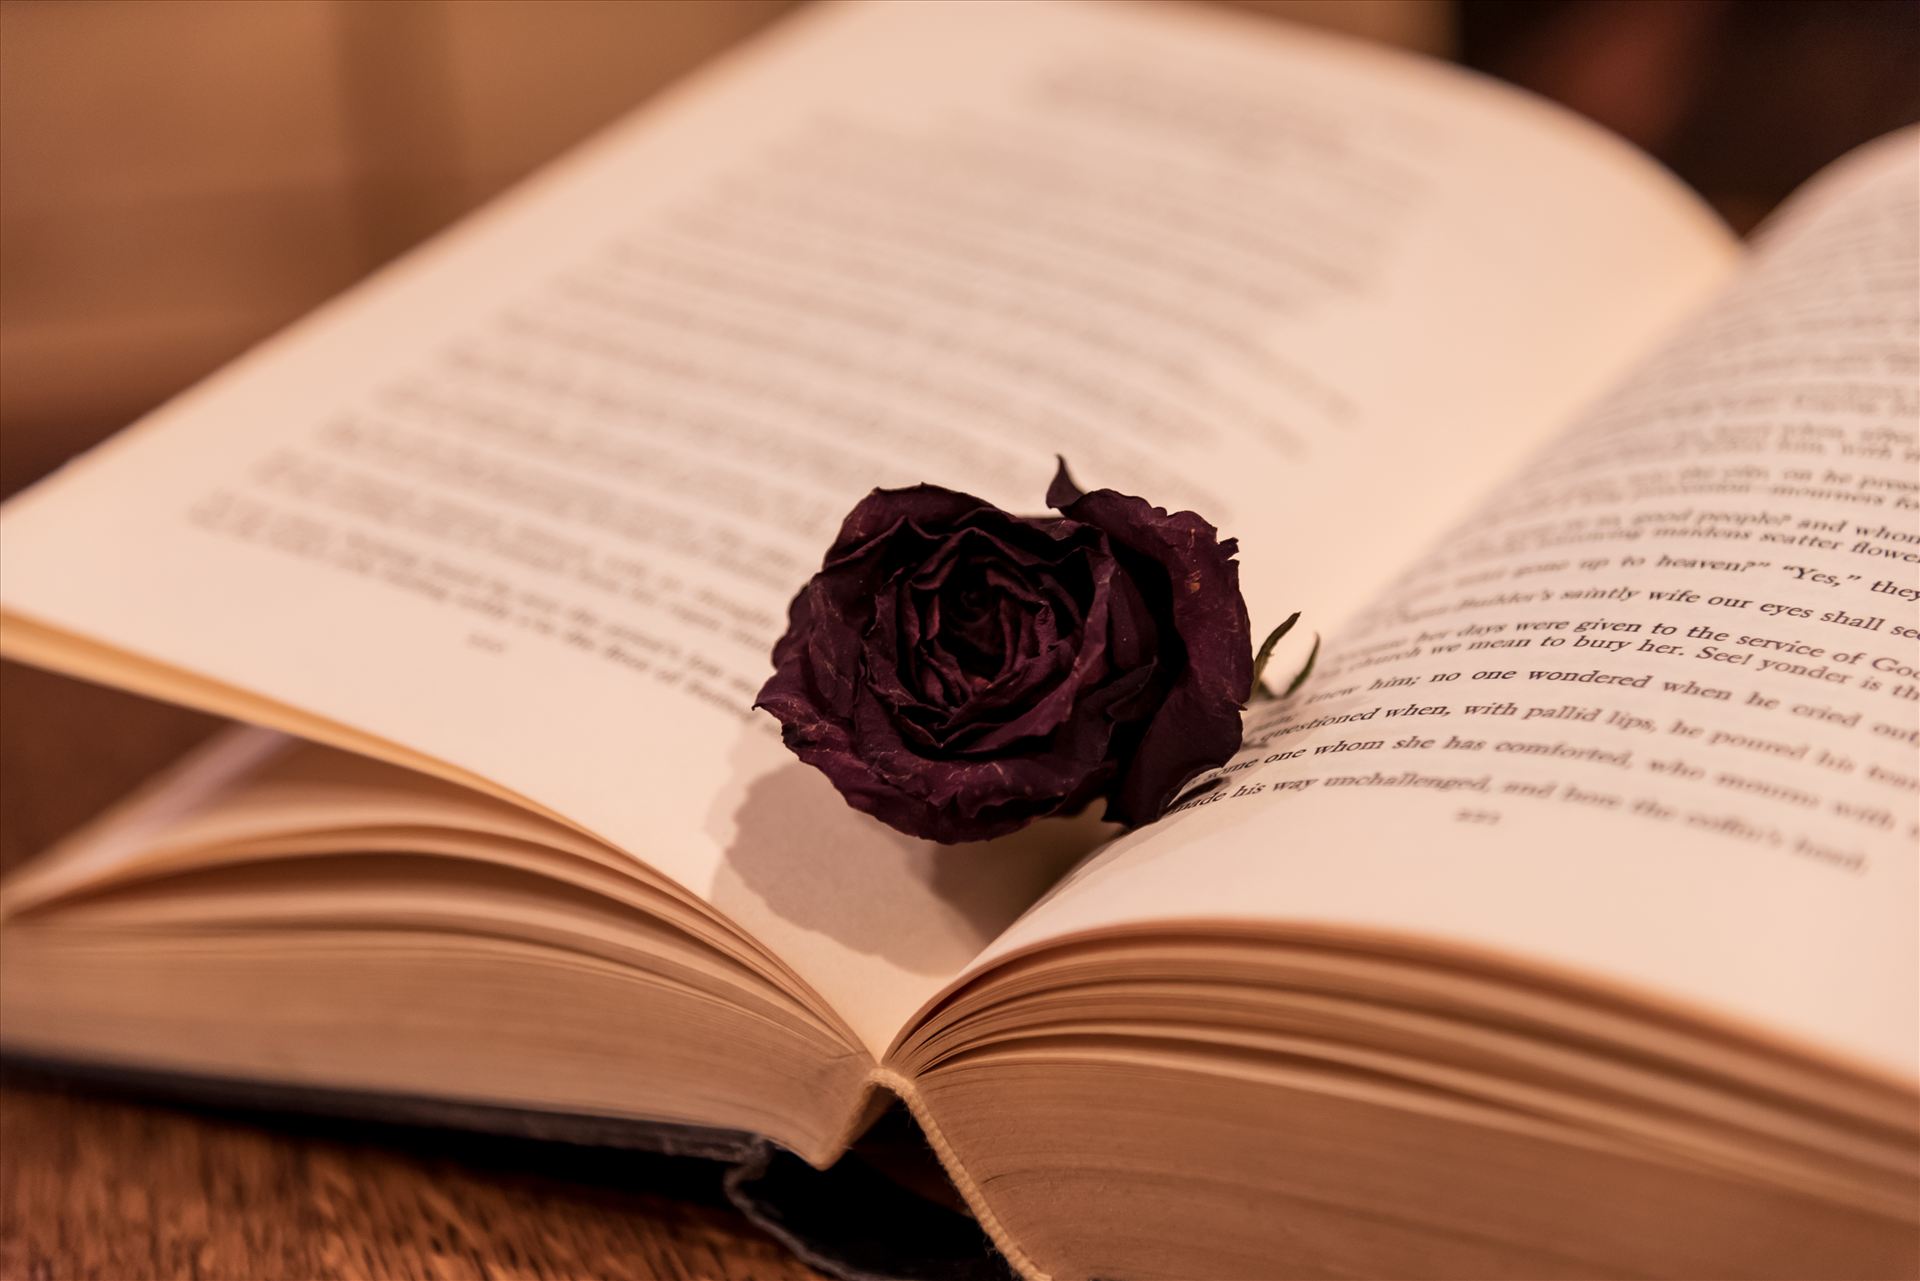 Black Rose in a Book.jpg Dried rose in a book, brittle and beautiful by Sarah Williams